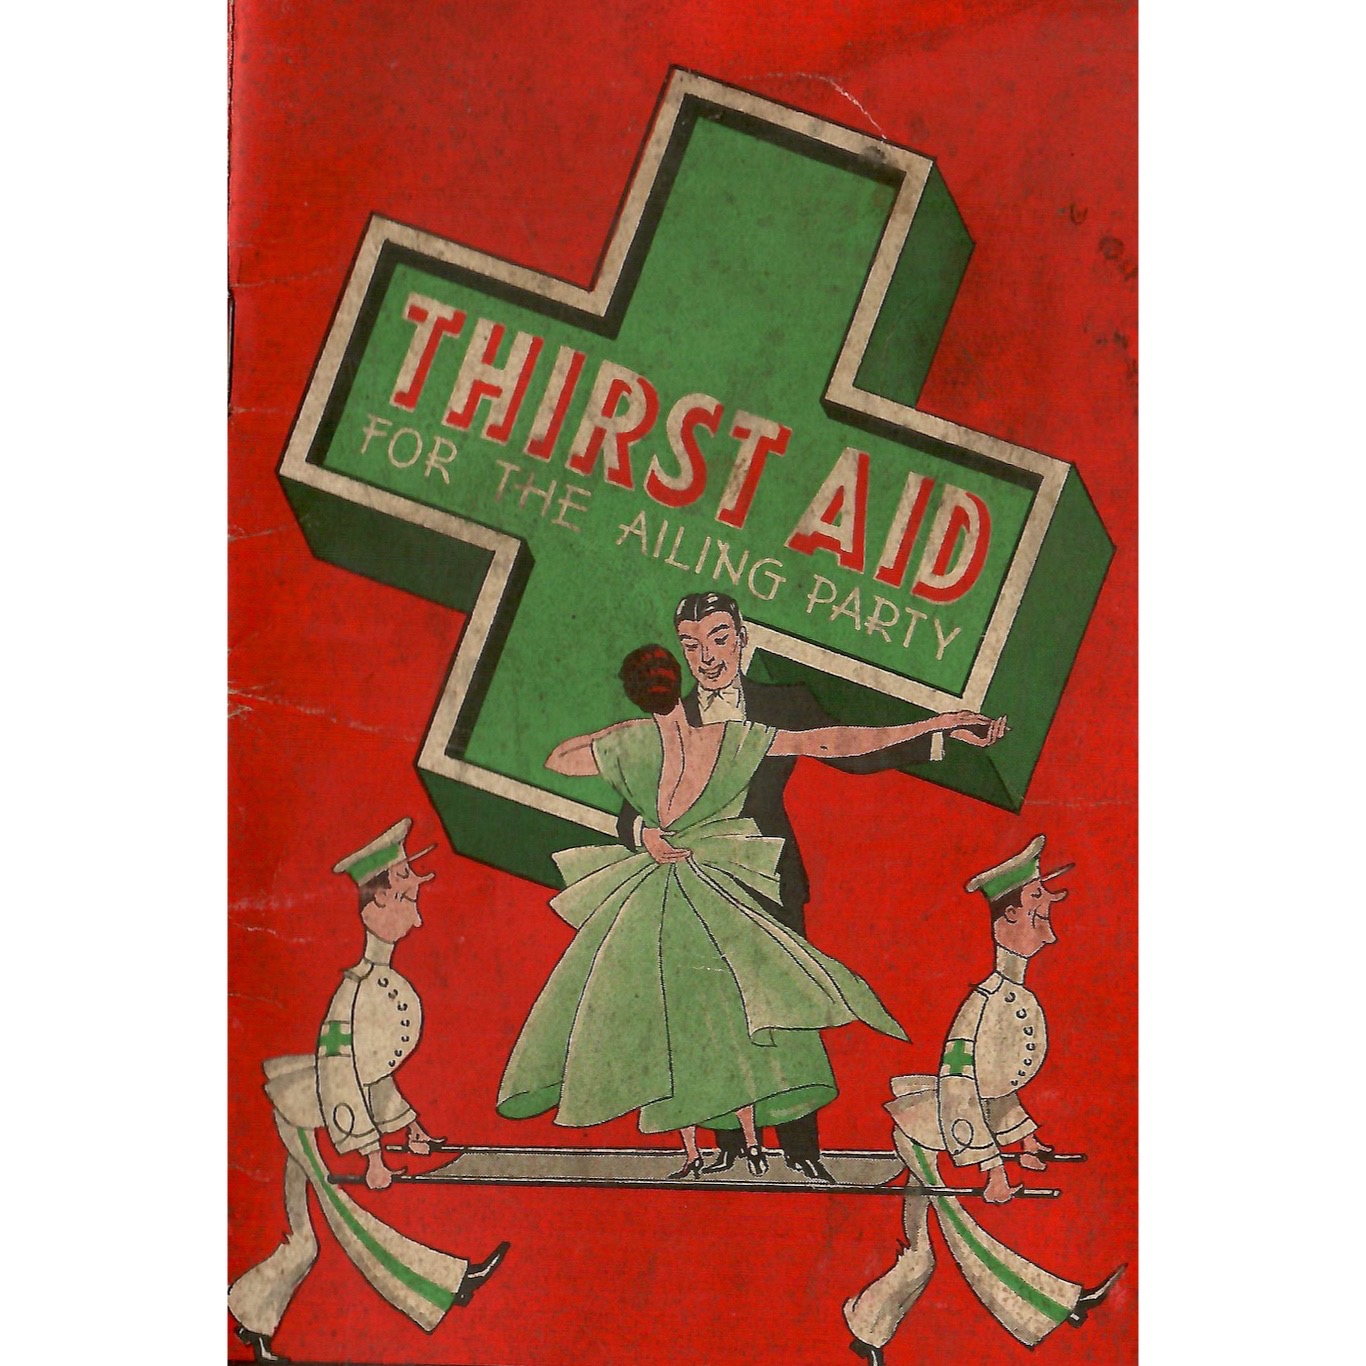 You are currently viewing Prohibition’s Over! Break out the “Thirst Aid!”